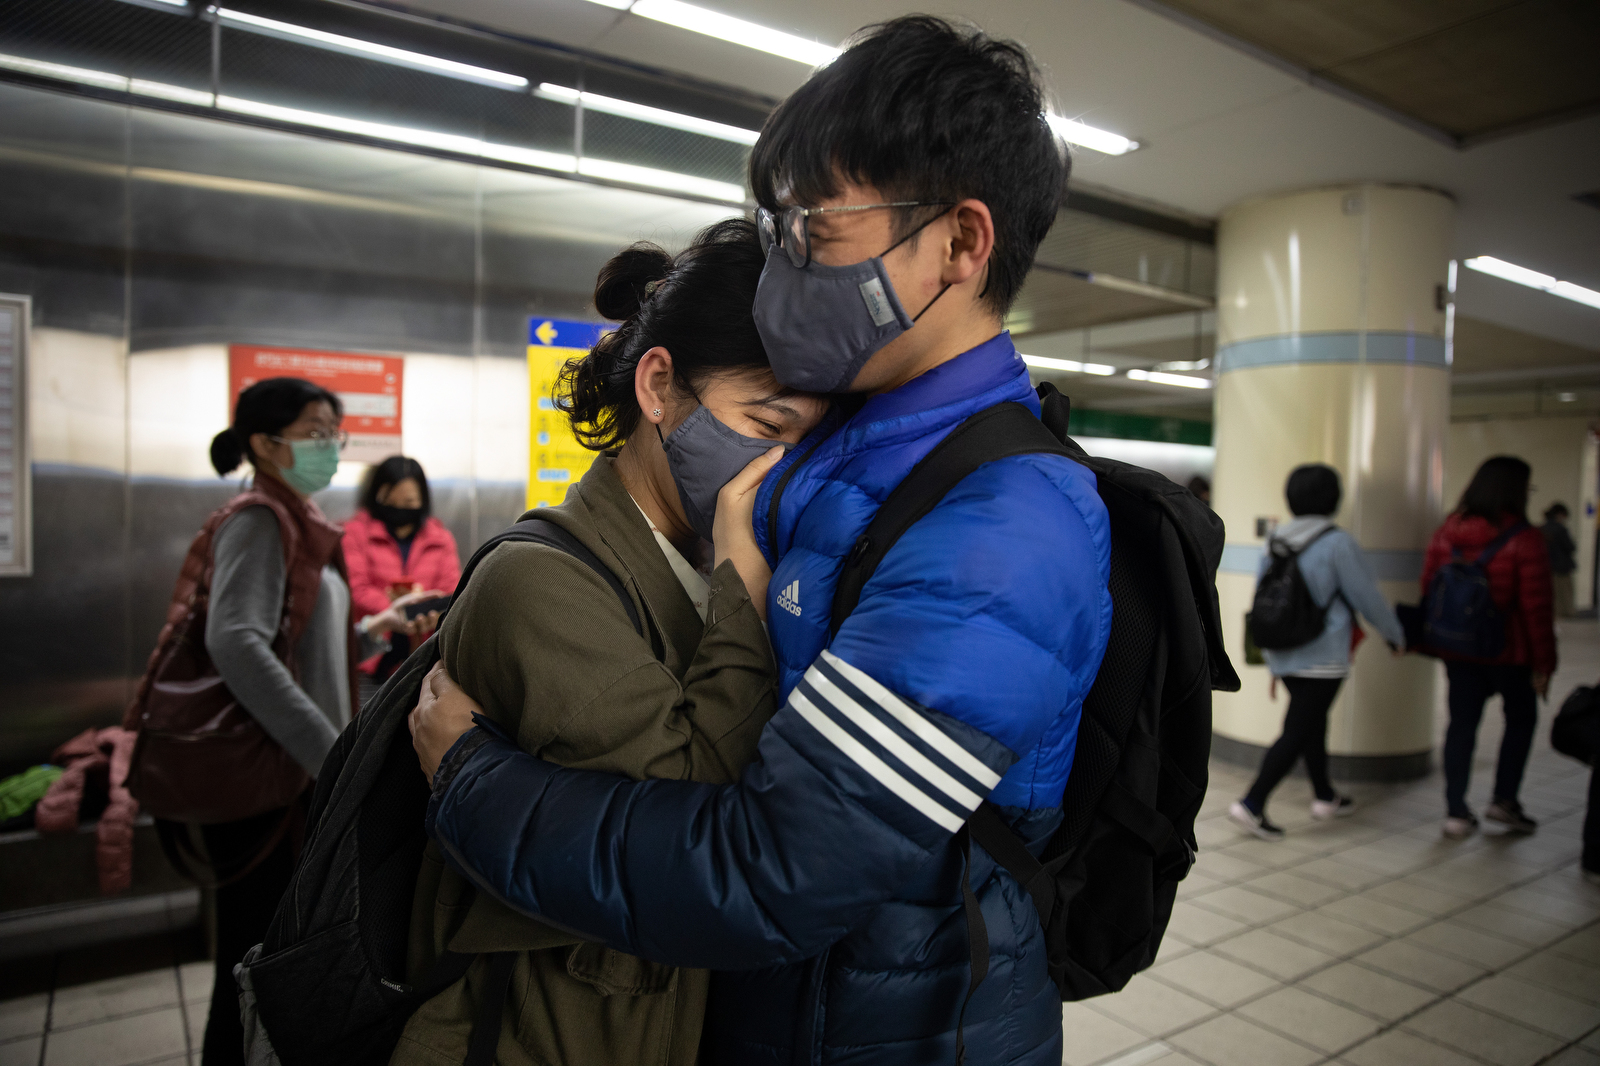 TAIPEI - MARCH 18:  A young couple embrace while waiting for a metro train in downtownTaipei, Taiwan on March 18, 2020. Taiwan, Singapore and Hong Kong have had more successful approaches in battling the pandemic given their experience with SARS in 2003. According to CDC current totals the Coronavirus ( COVID-19) has now effected 235,939 globally, killing 9,874. It has spread to 157 countries. (Photo by Paula Bronstein/Getty Images )BANGKOK - MARCH  :  in Taipei, Taiwan on March 19, 2020. According to CDC current totals the Coronavirus ( COVID-19) has now effected 235,939 globally, killing 9,874. It has spread to 157 countries. (Photo by Paula Bronstein/Getty Images )BANGKOK - MARCH  :  in Taipei, Taiwan on March 19, 2020. According to CDC current totals the Coronavirus ( COVID-19) has now effected 235,939 globally, killing 9,874. It has spread to 157 countries. (Photo by Paula Bronstein/Getty Images )